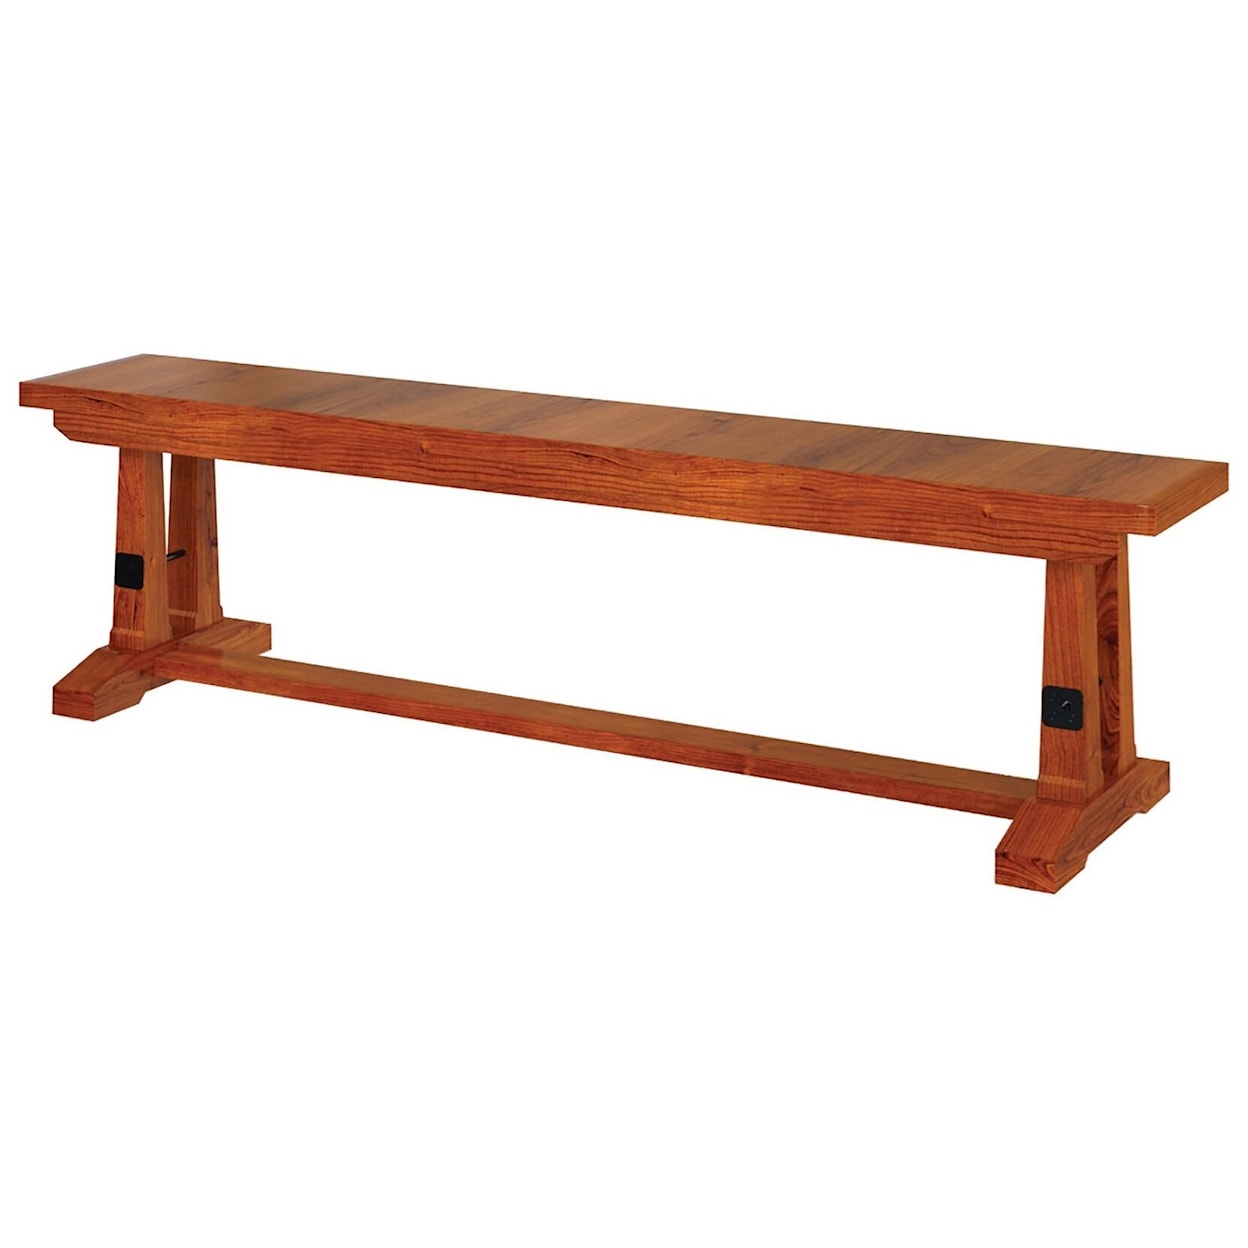 Hermie's Table Shop Carla Elizabeth Customizable Solid Wood Dining Bench